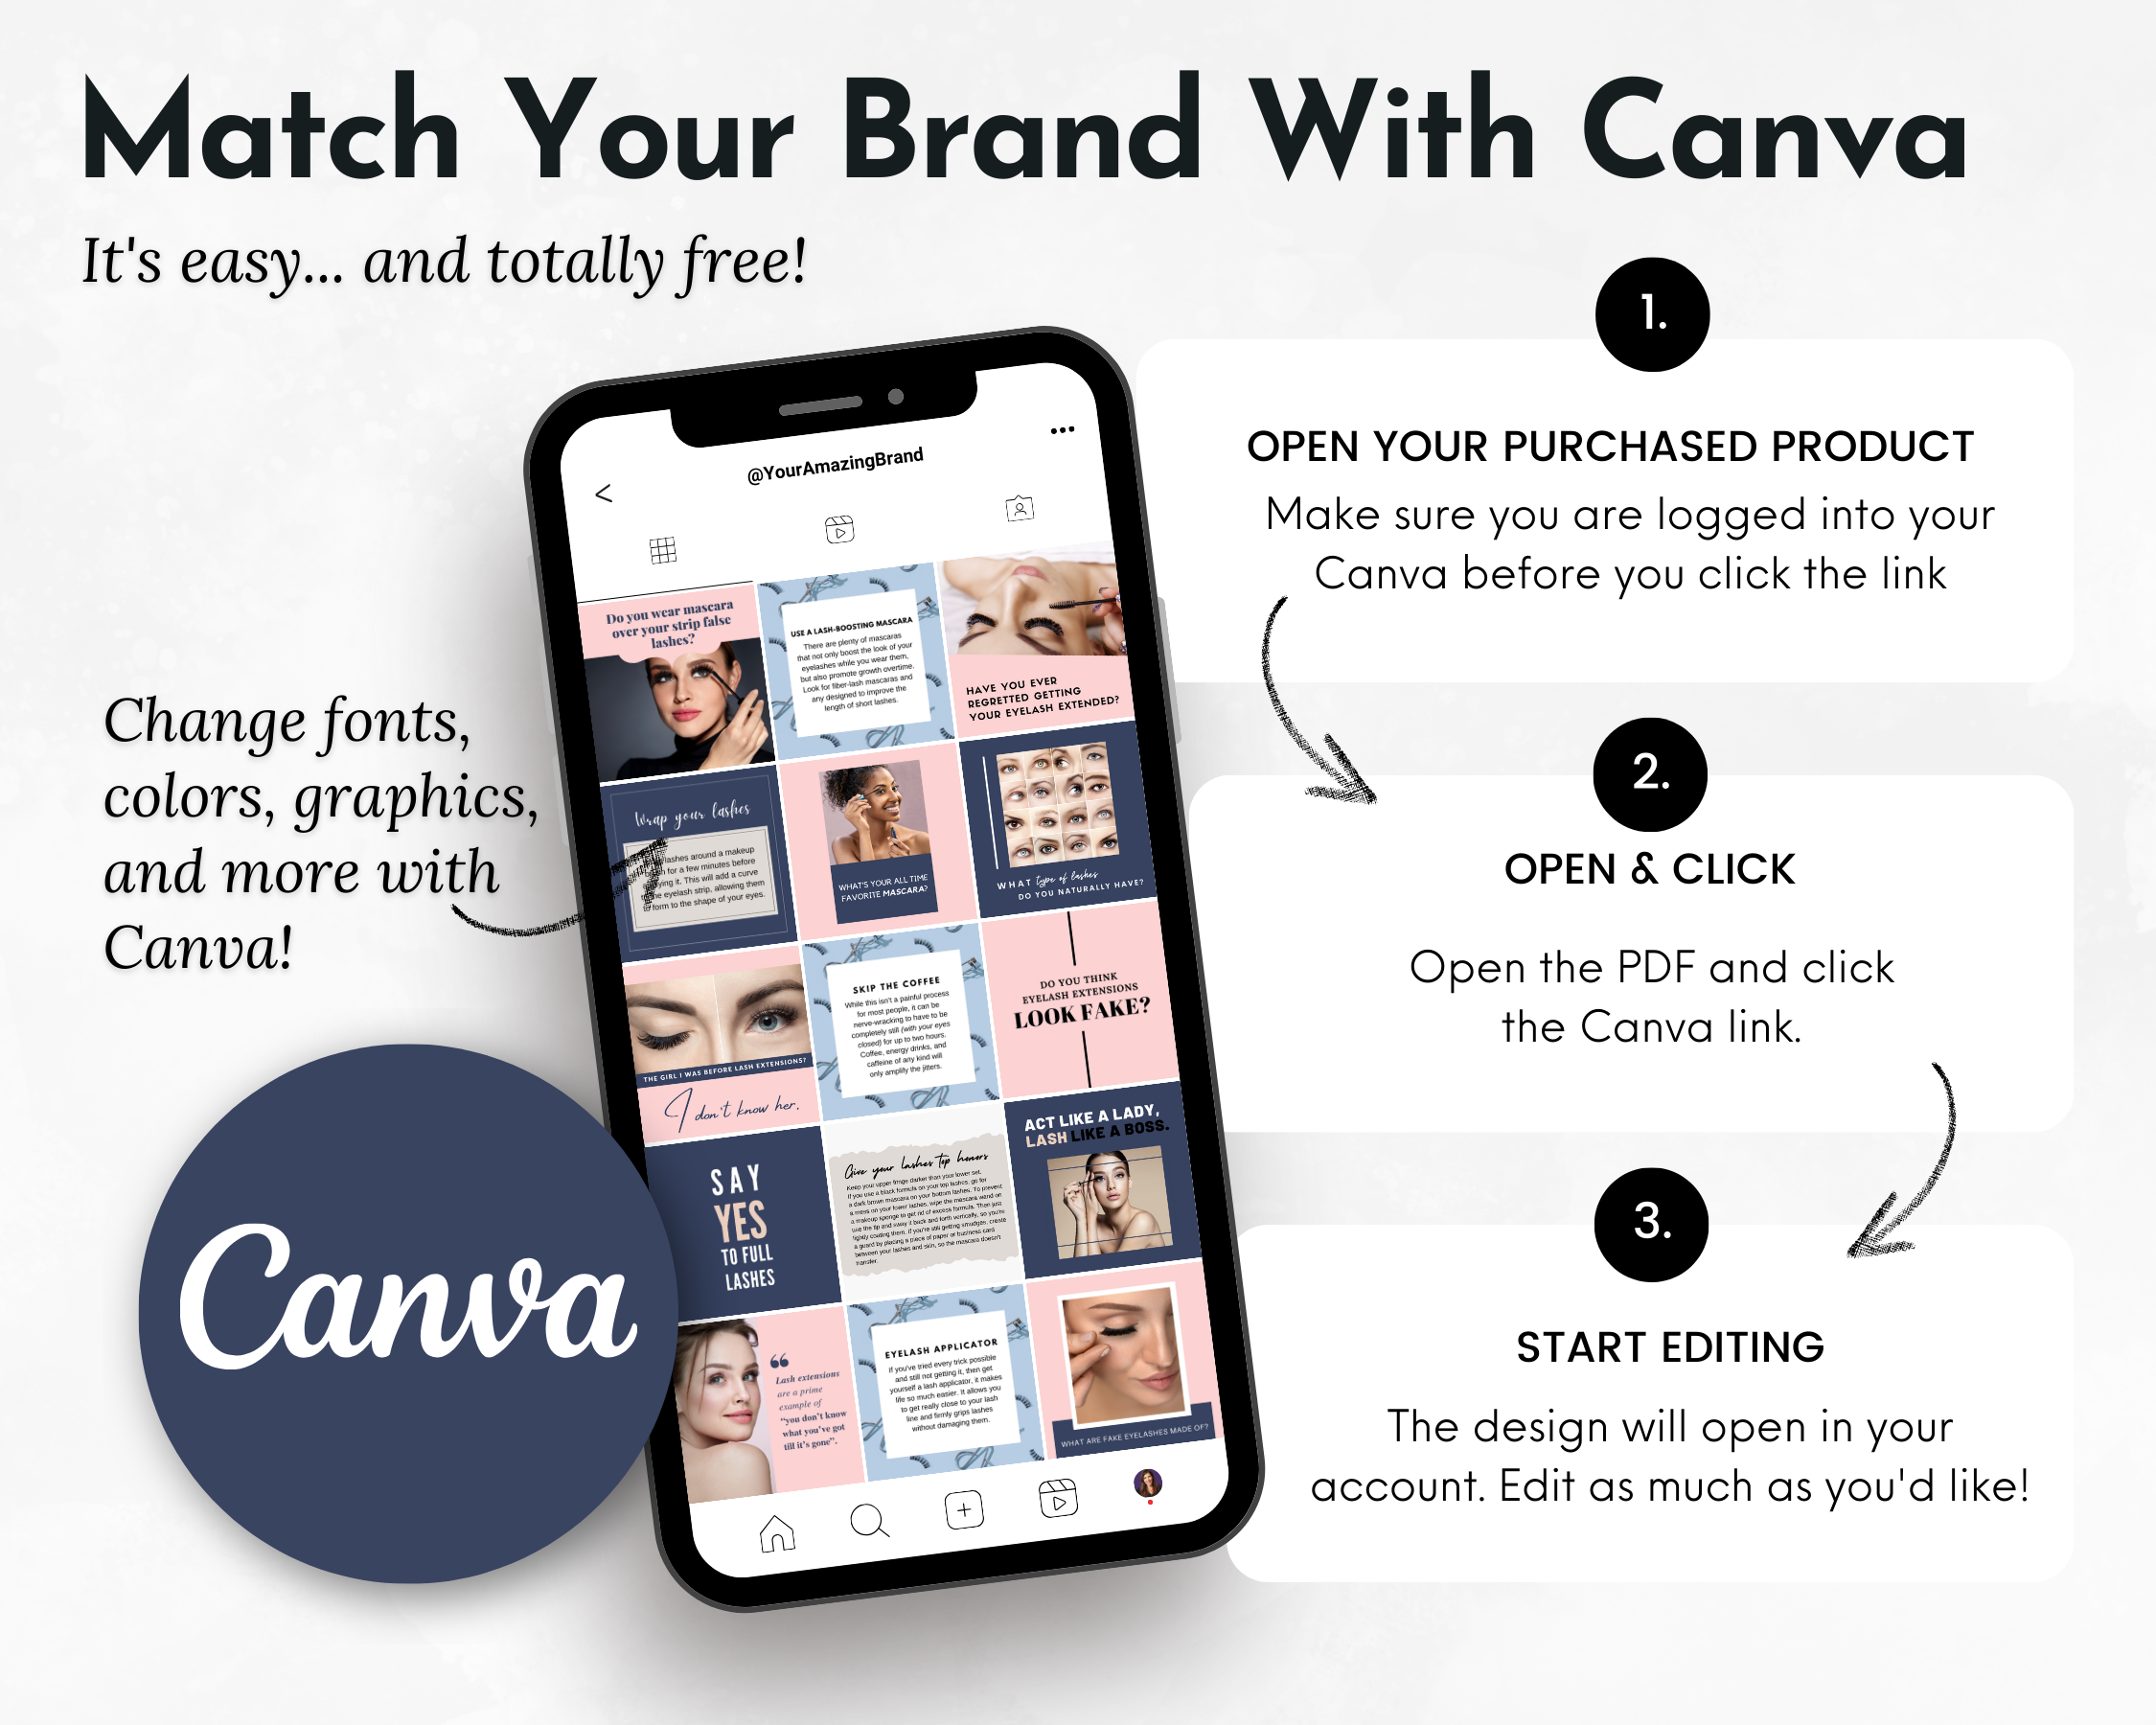 An Eyelashes Social Media Post Bundle with Canva Templates from the brand Socially Inclined.